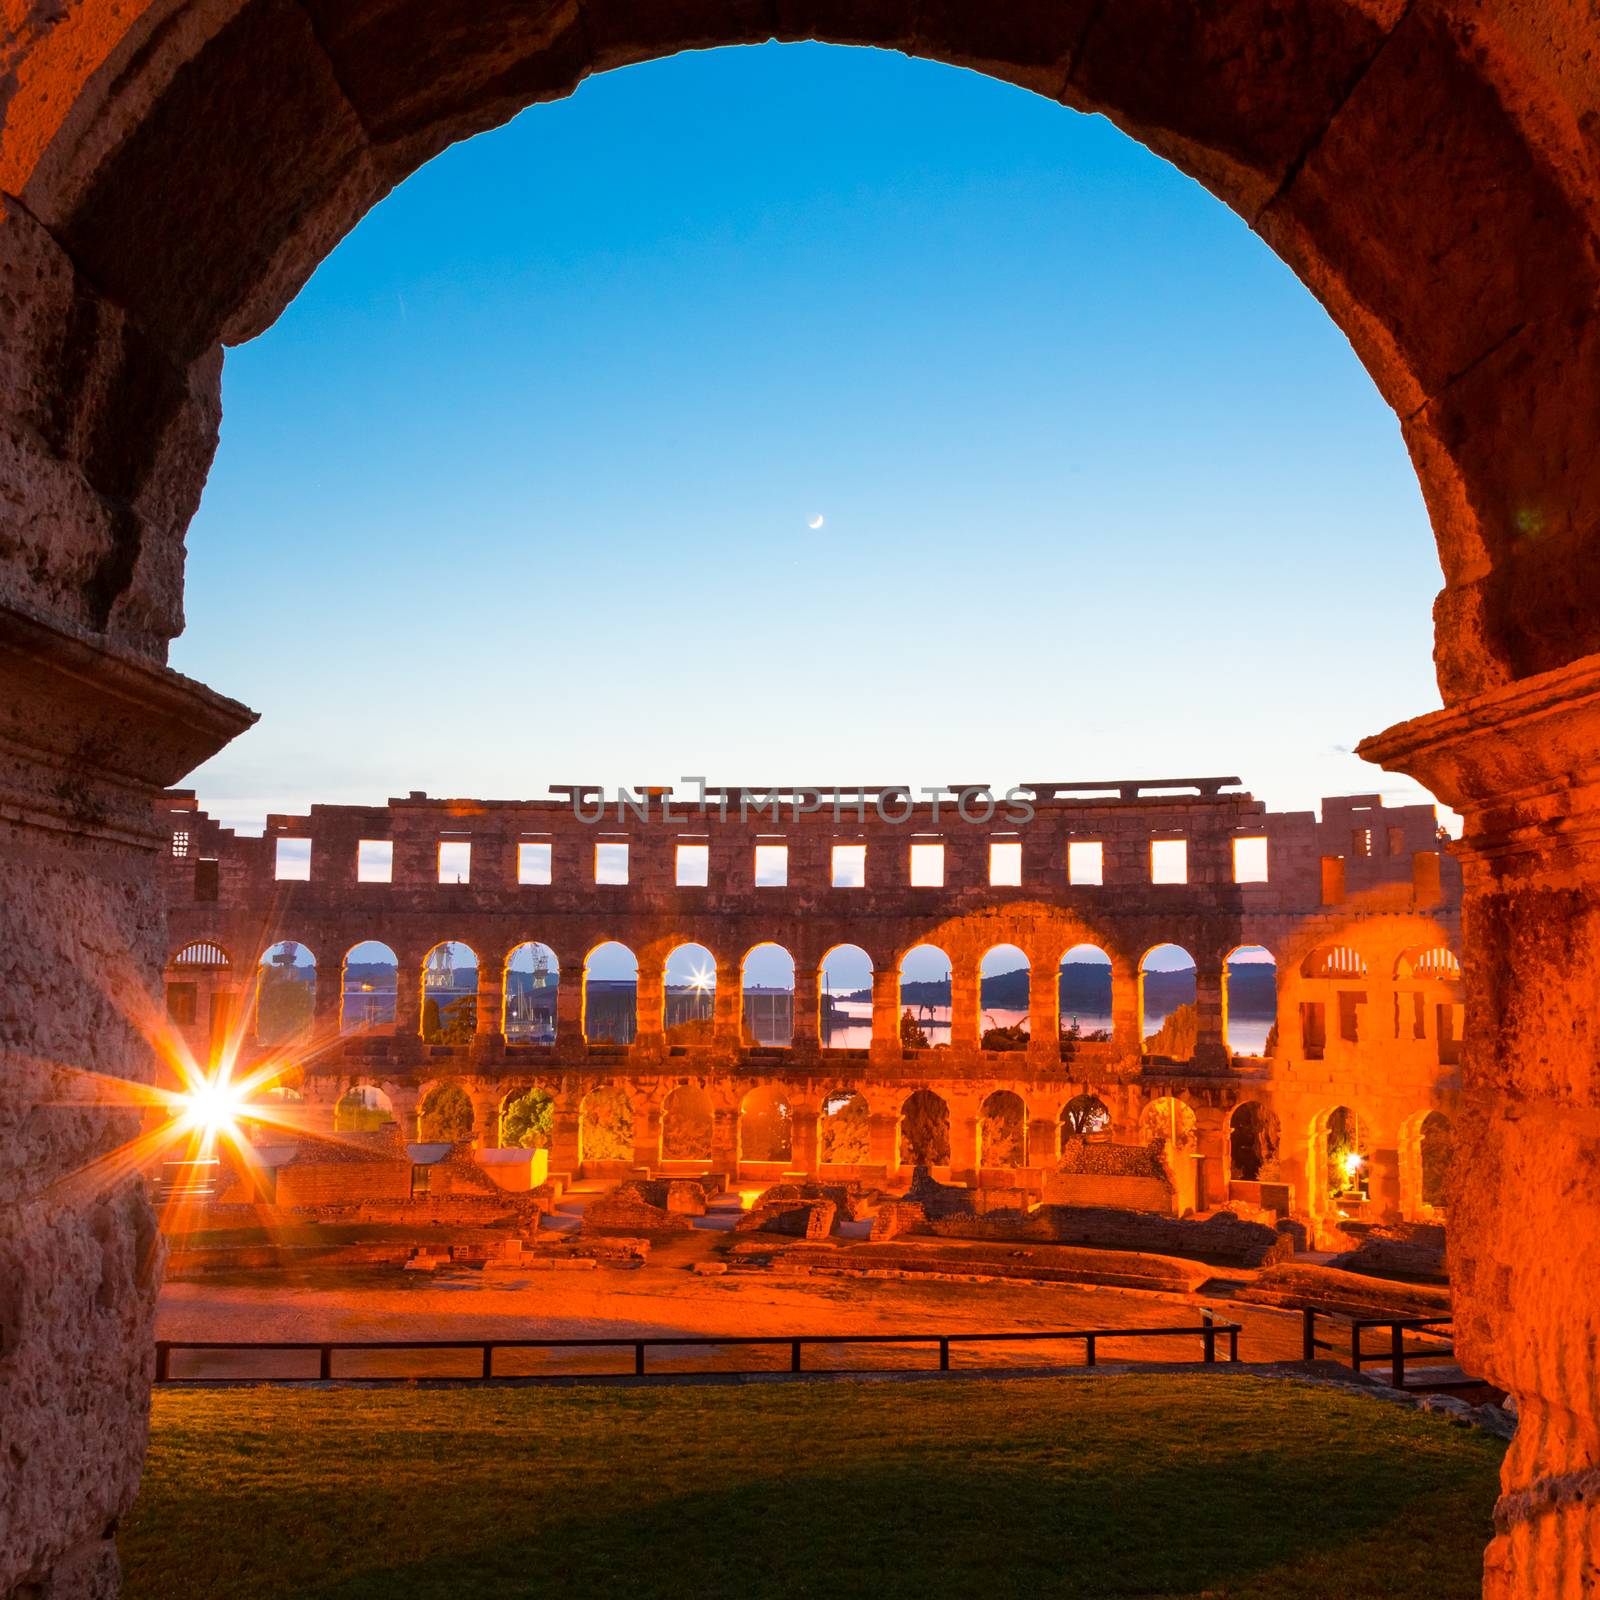 The Roman Amphitheater of Pula, Croatia shot at dusk. It was constructed in 27 - 68 AD and is among the six largest surviving Roman arenas in the World and best preserved ancient monument in Croatia.